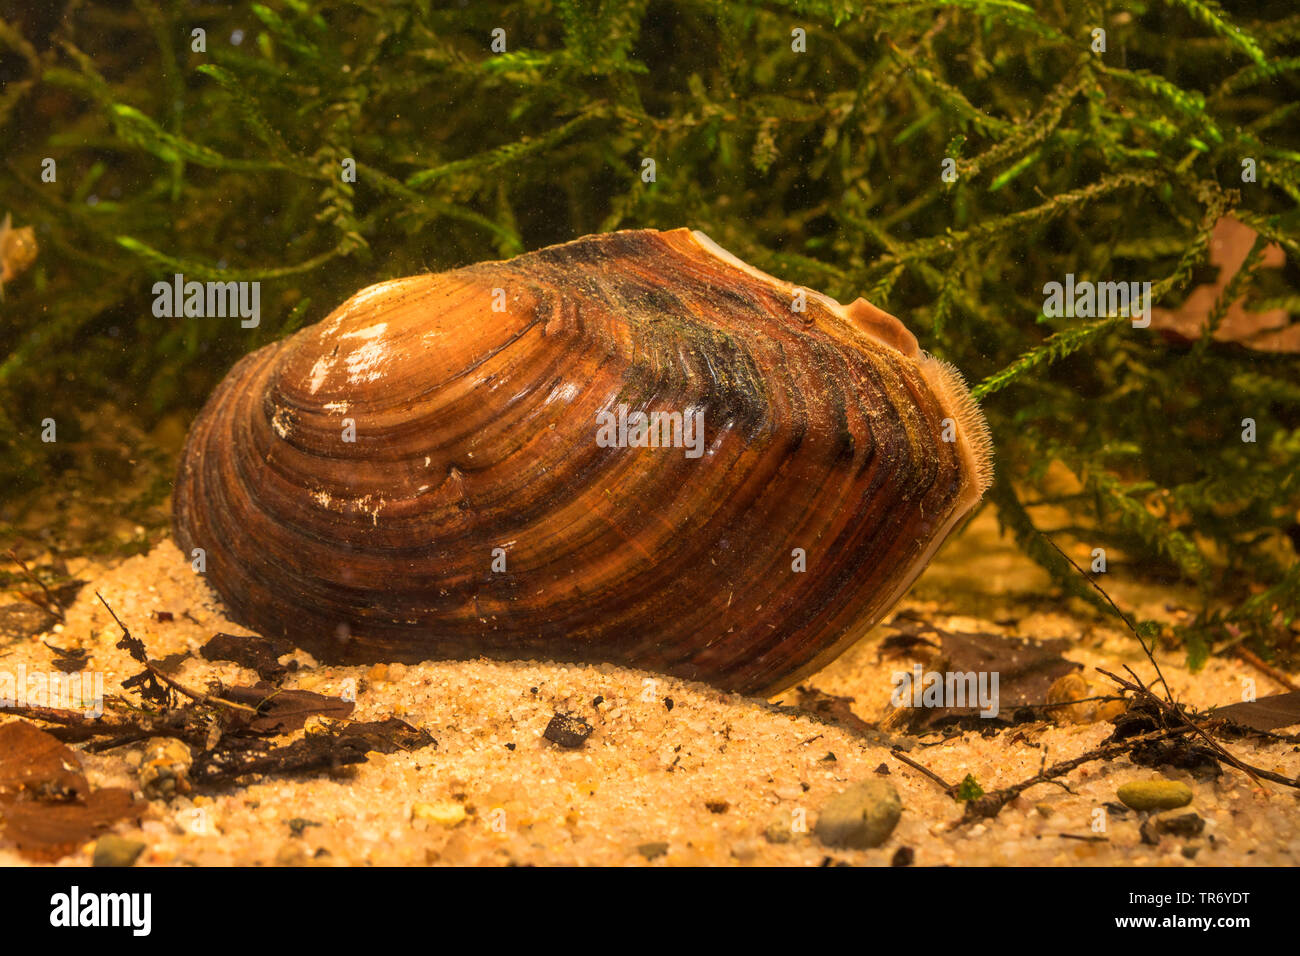 swan mussel (Anodonta cygnea), on the bottom of the body of water, Germany Stock Photo